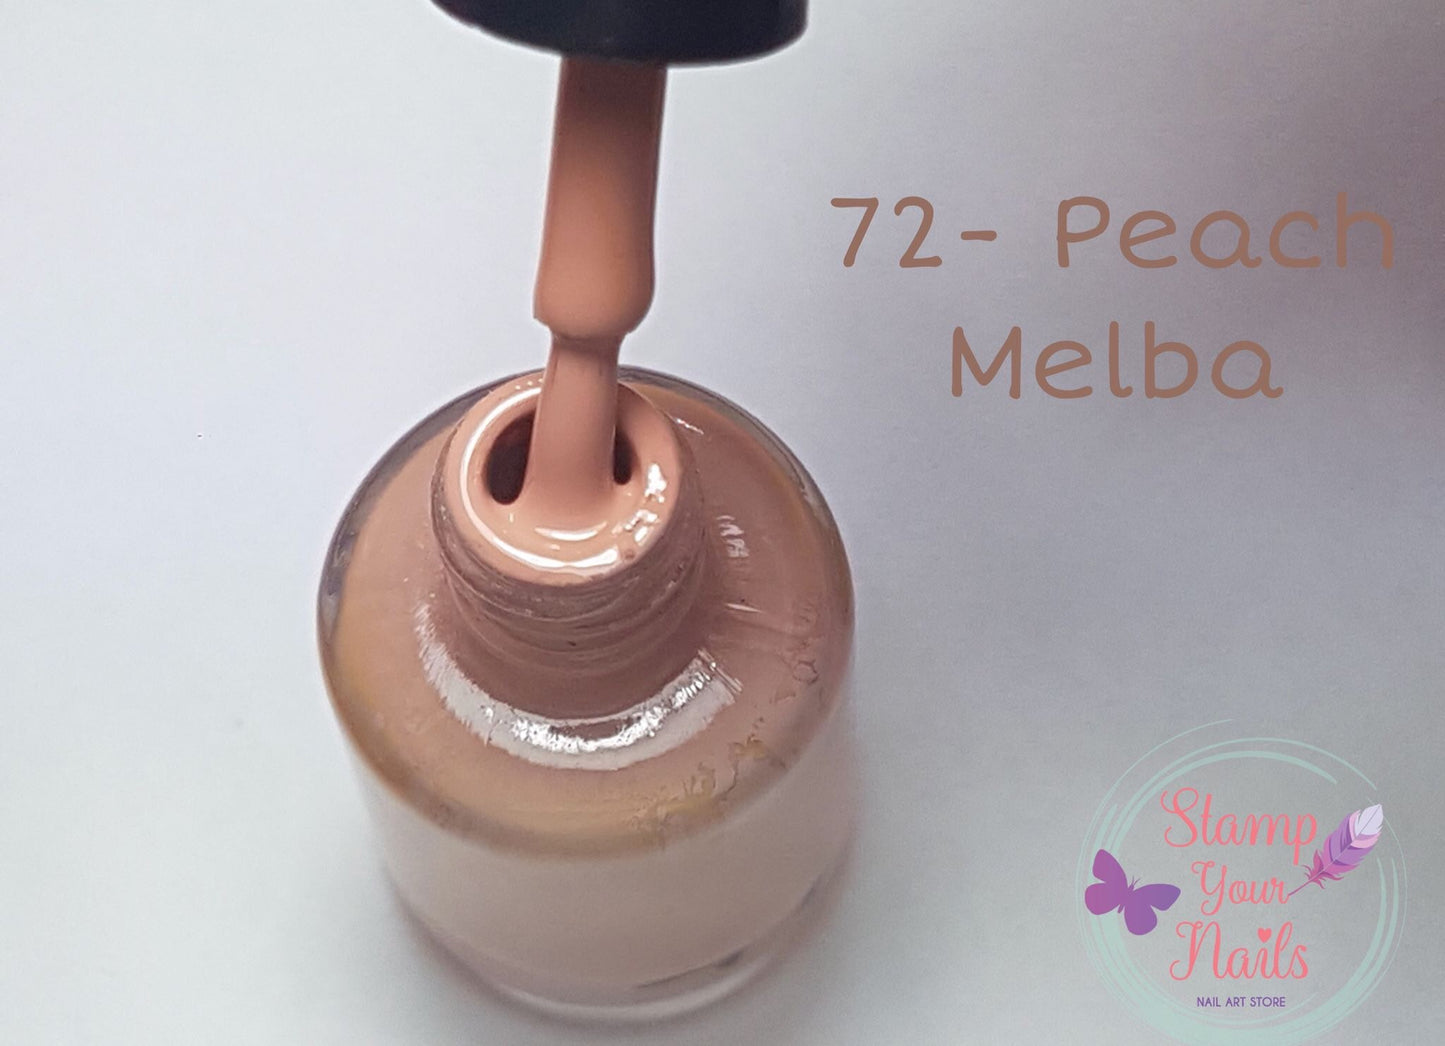 72 Peach Melba - Stamp your nails